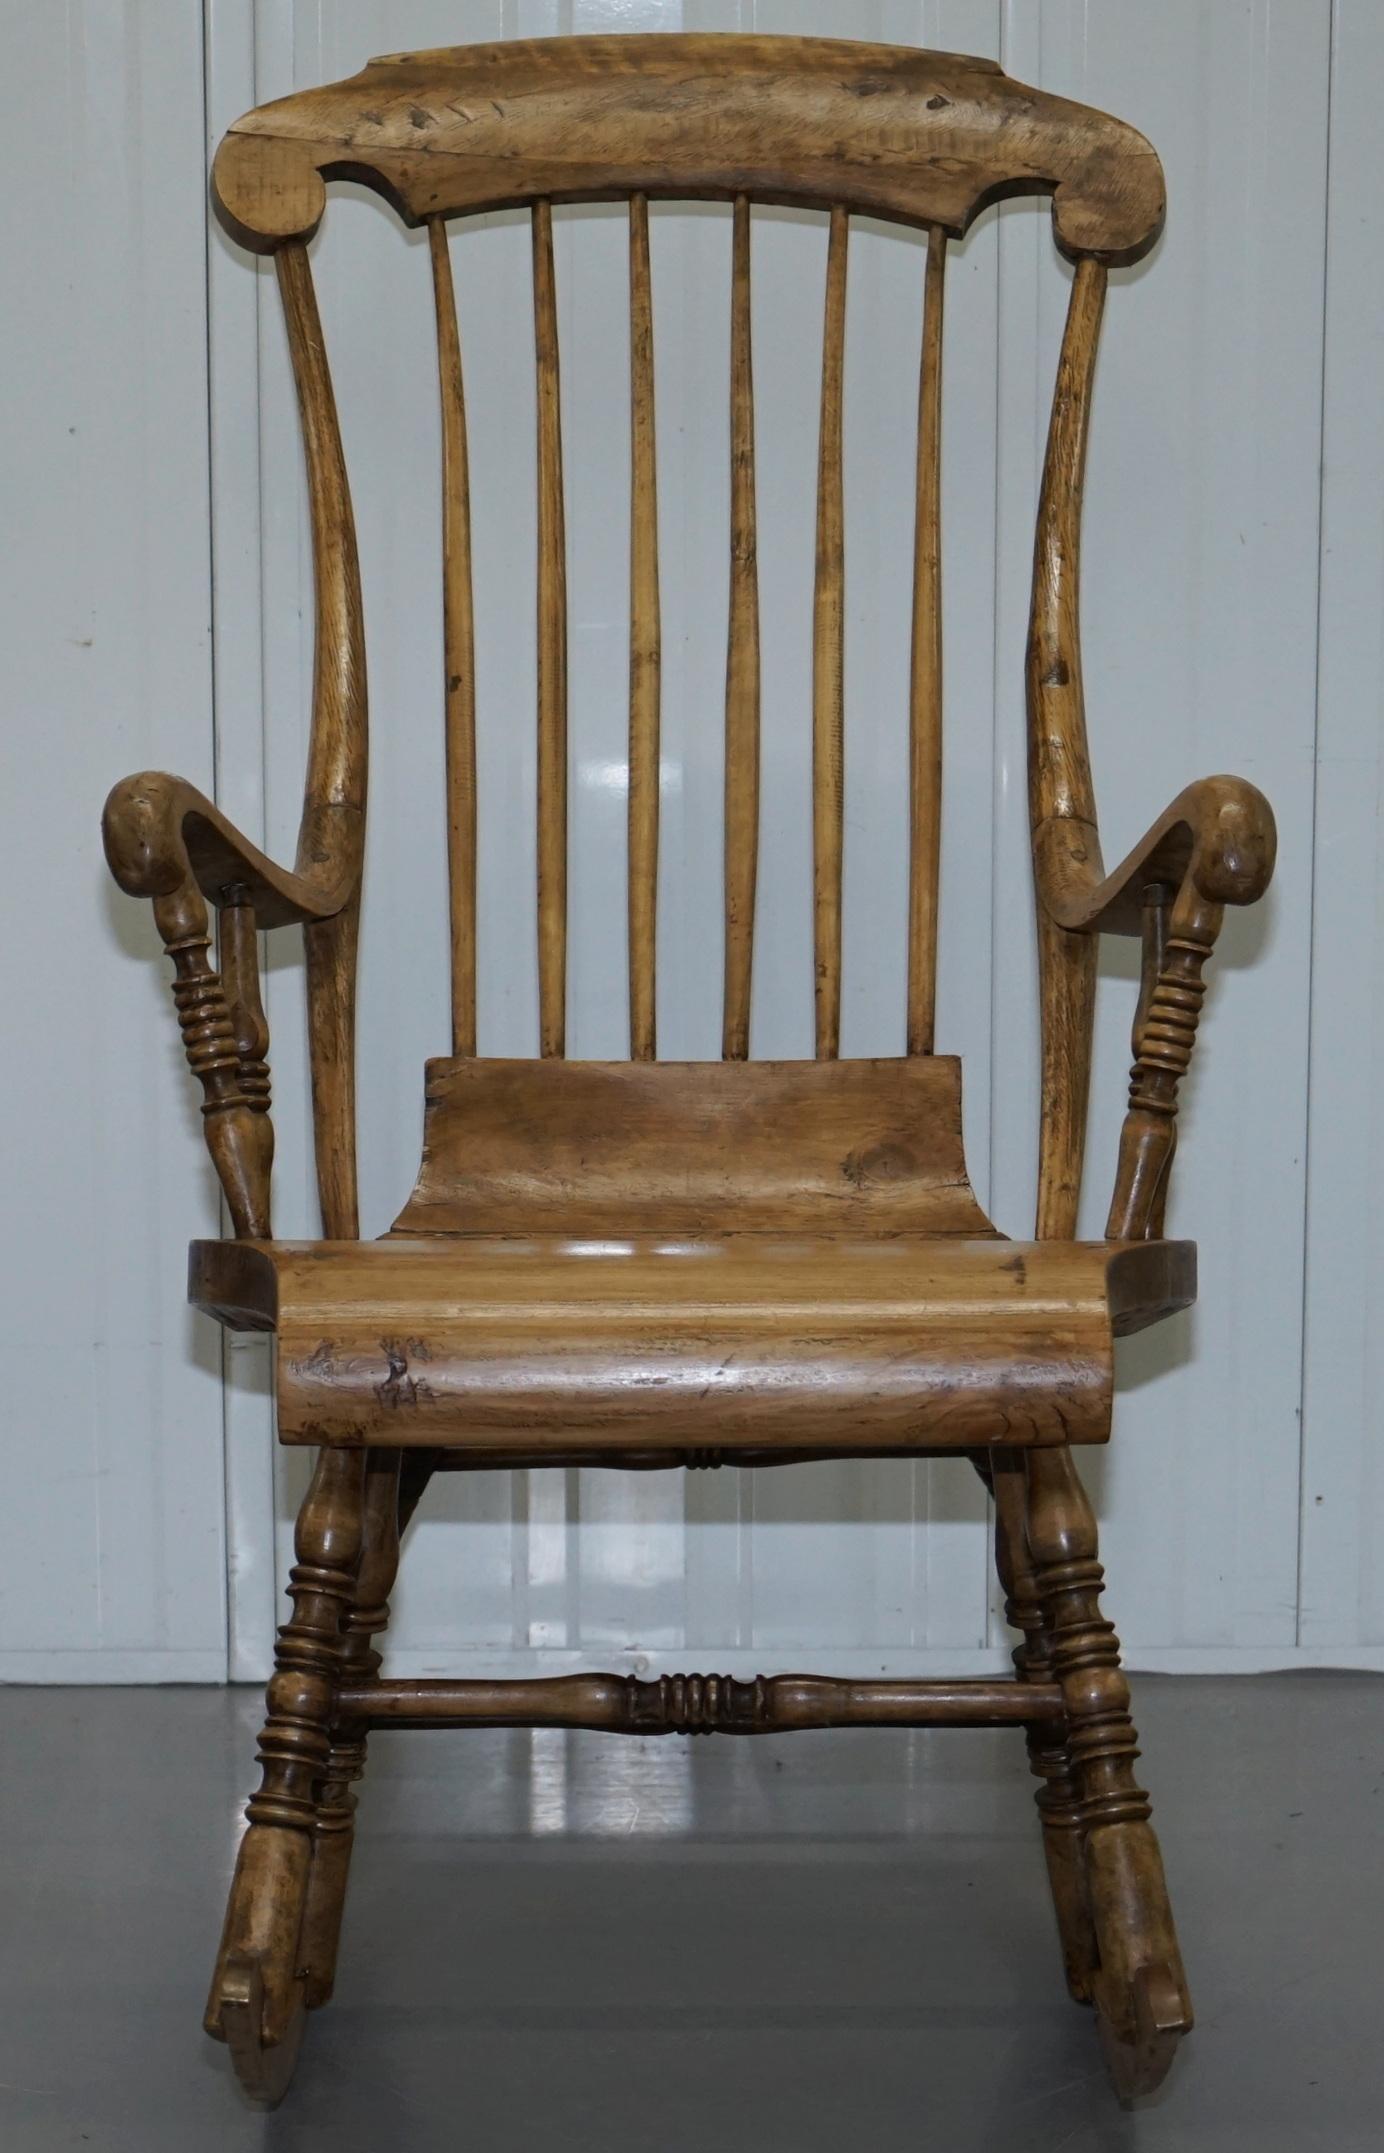 We are delighted to offer for sale this absolutely stunning William IV hand carved solid pine Swedish rocking armchai

This is a very ornate and decorative armchair, the timber is sculptured all over, the lines are so exaggerated compared to